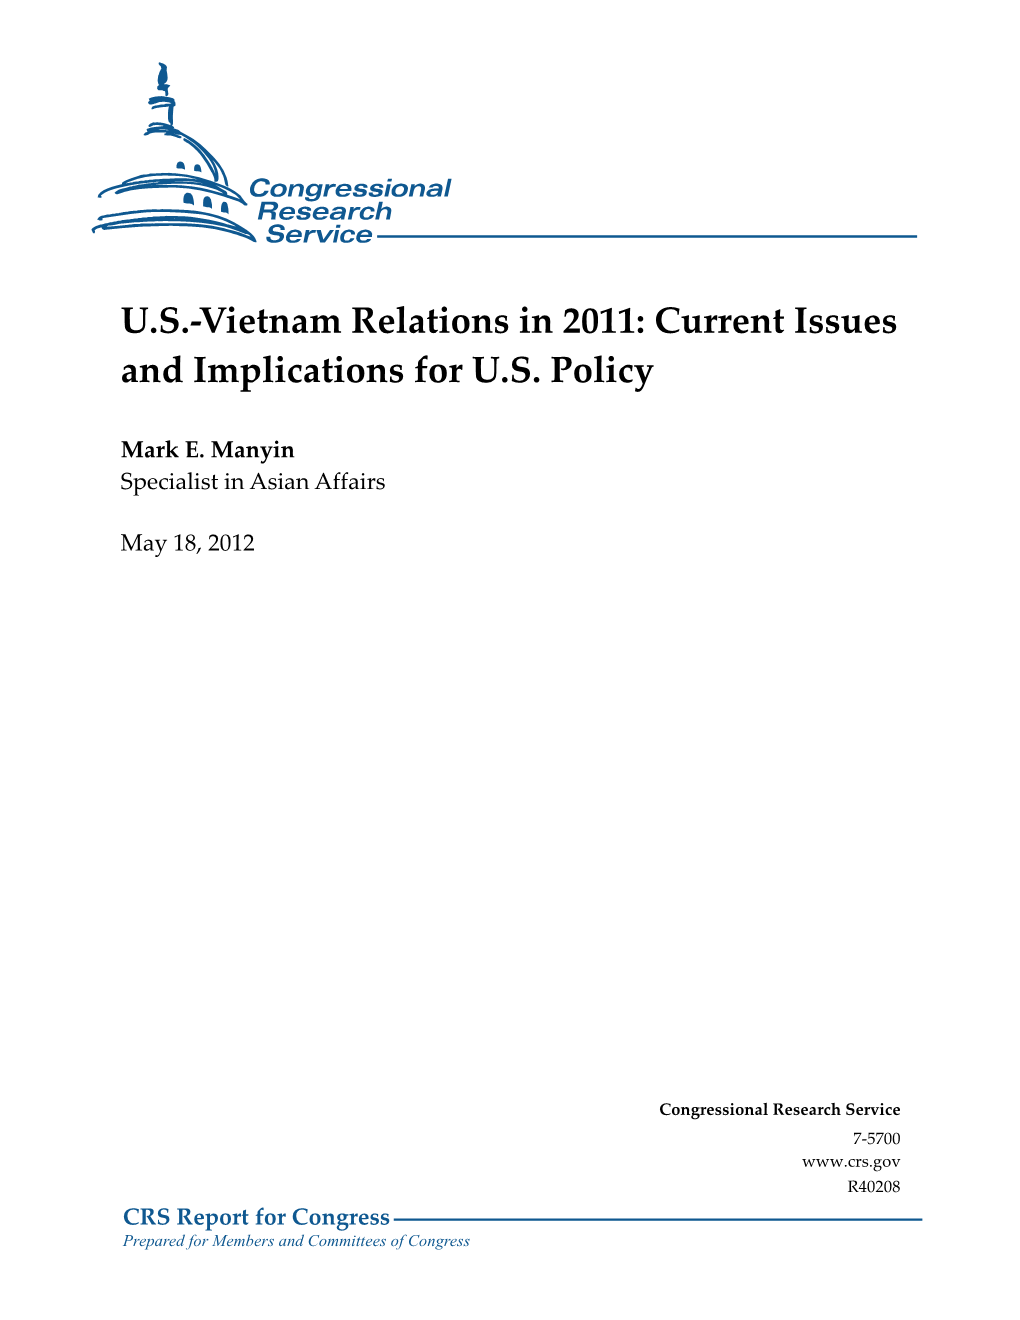 U.S.-Vietnam Relations in 2011: Current Issues and Implications for U.S. Policy